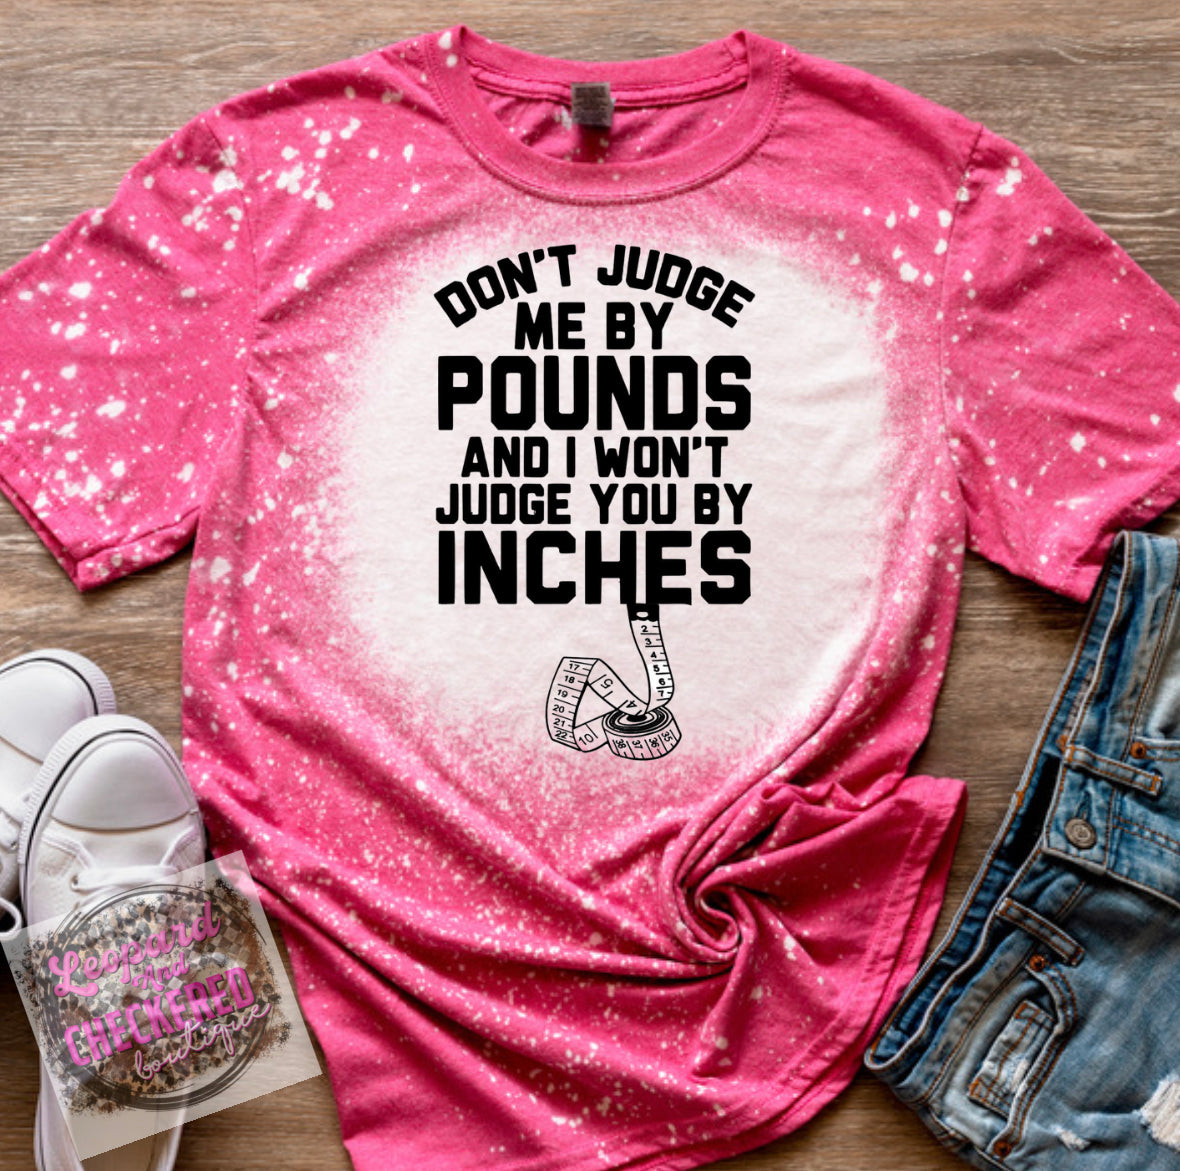 Don’t judge me by pounds and I won’t judge you by inches Tshirt